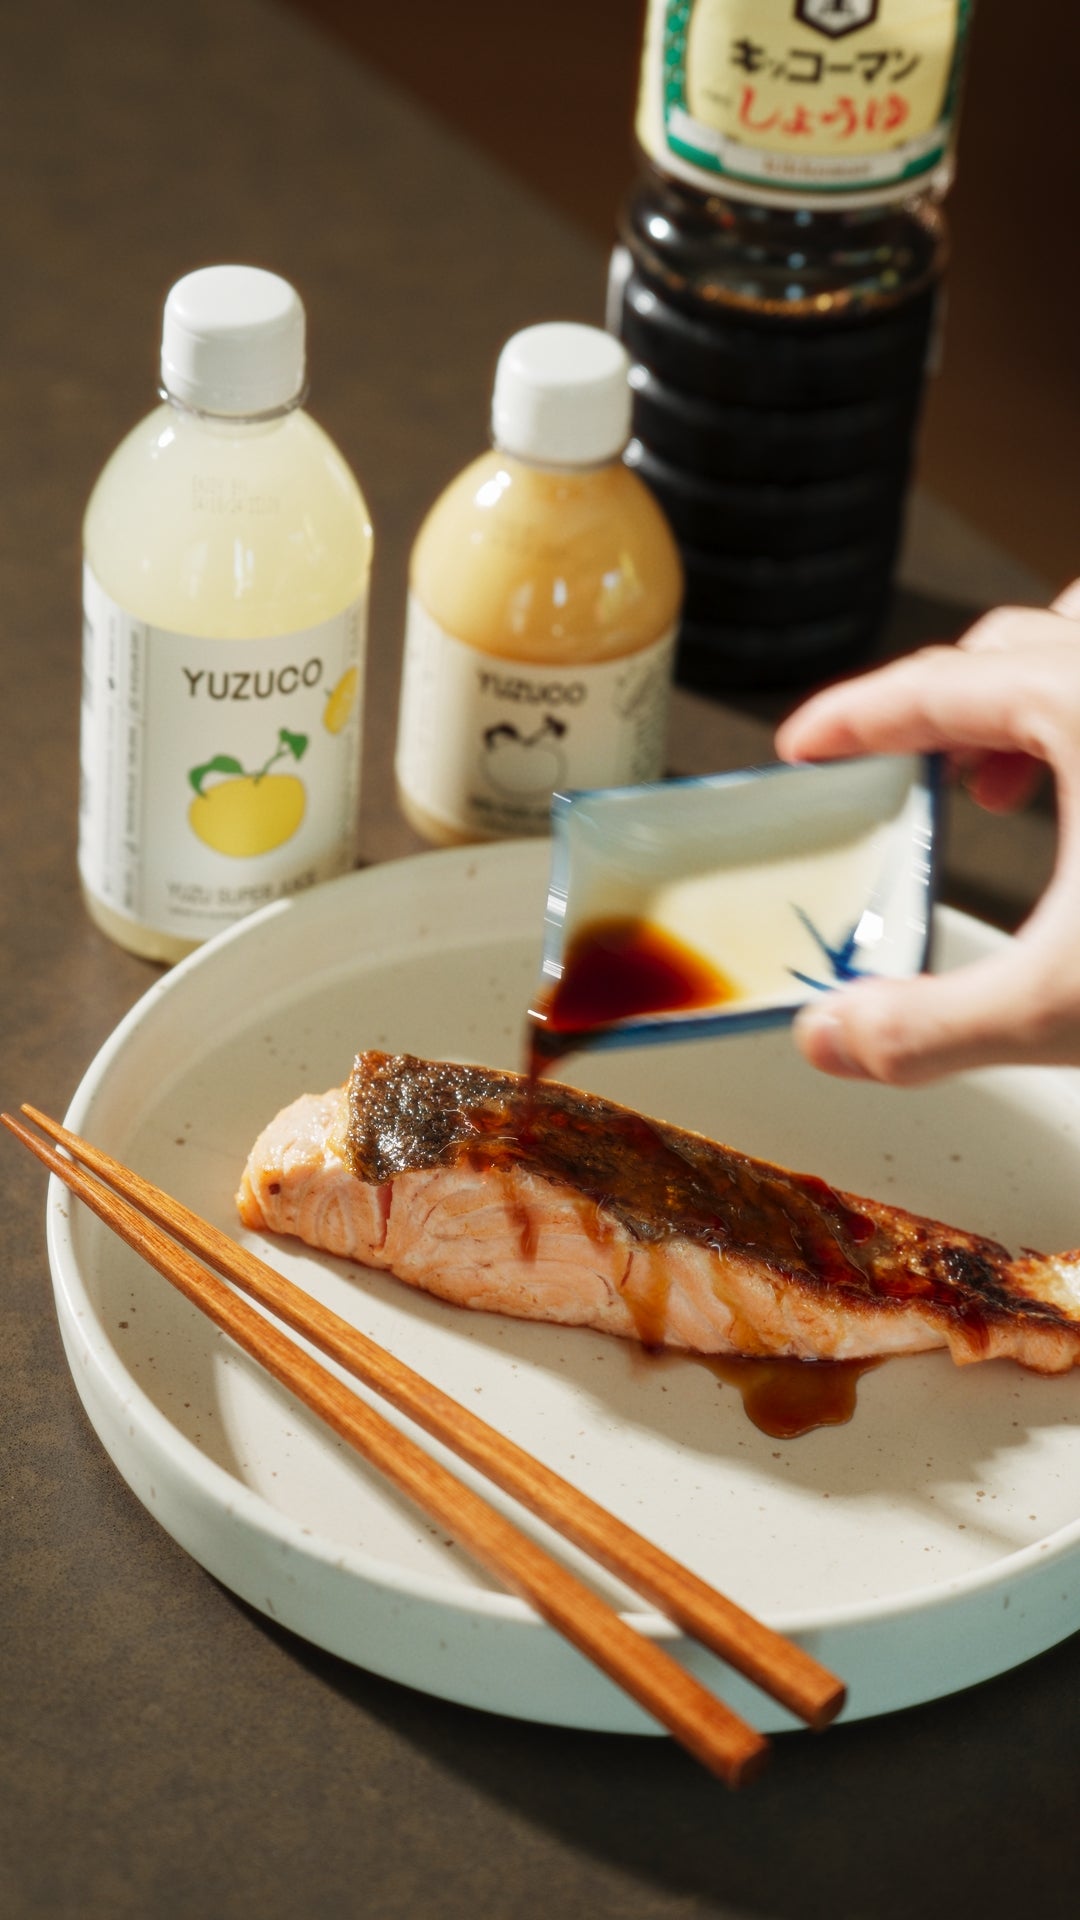 yuzu ponzu being poured over a freshly cooked salmon filet on a plate next to yuzu yuzu juice and yuzu super juice and soy sauce bottles